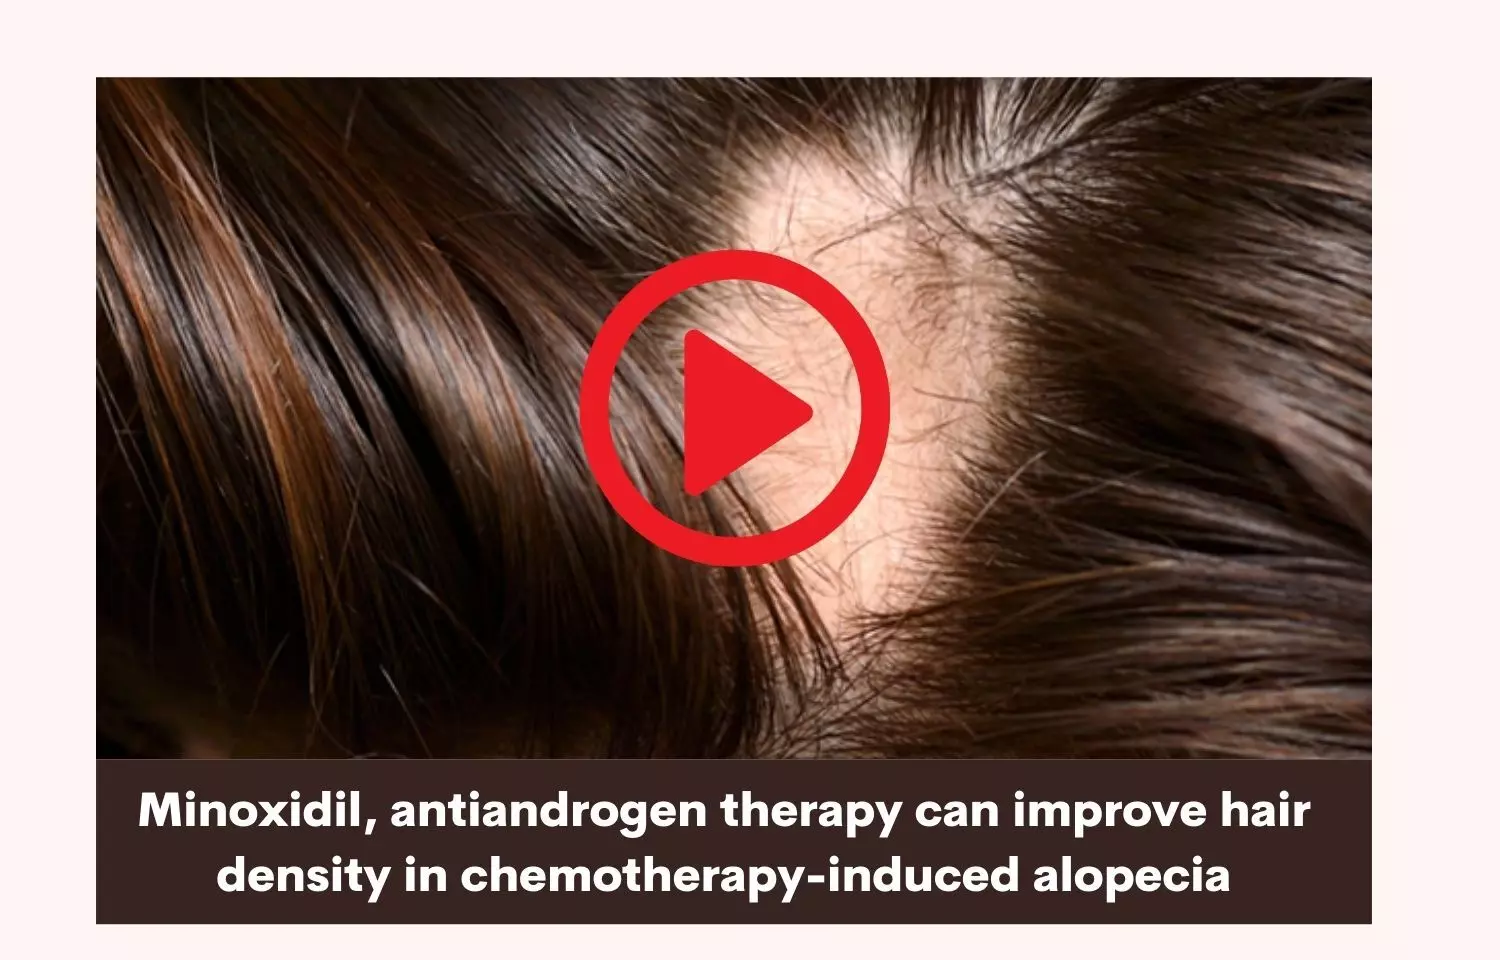 Minoxidil improves hair density in chemotherapy-induced alopecia